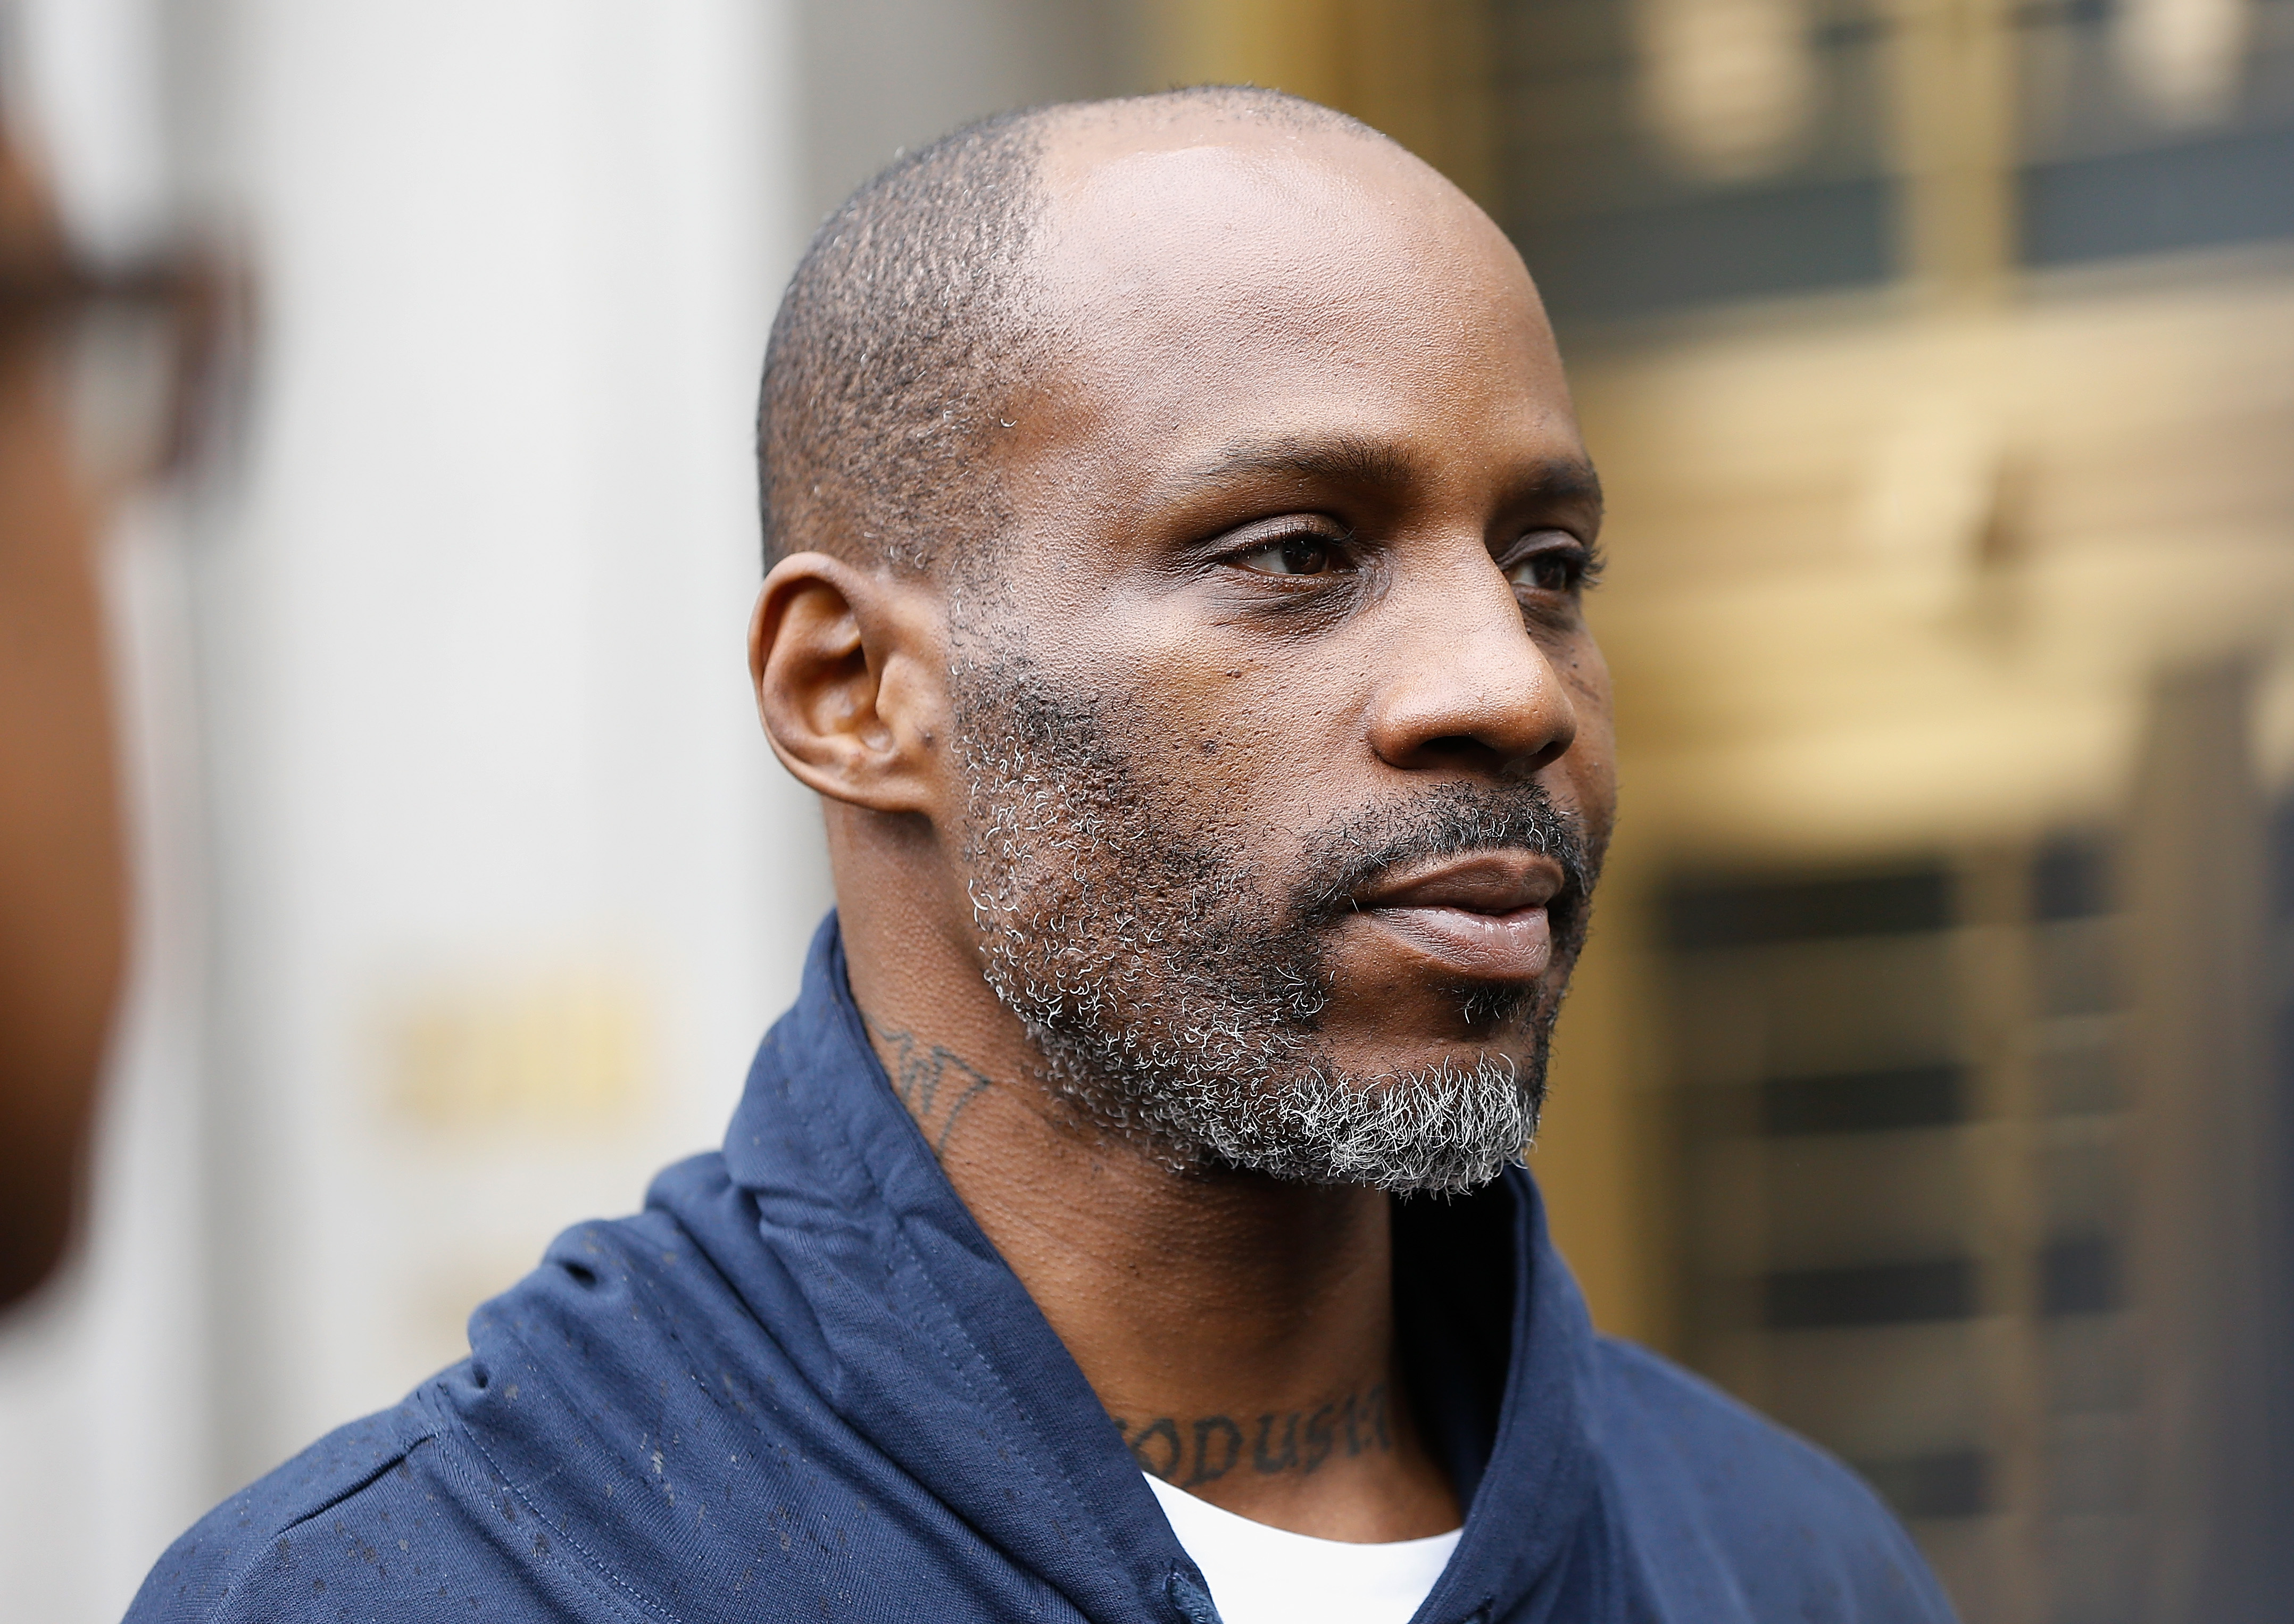 DMX outside of New York courthouse